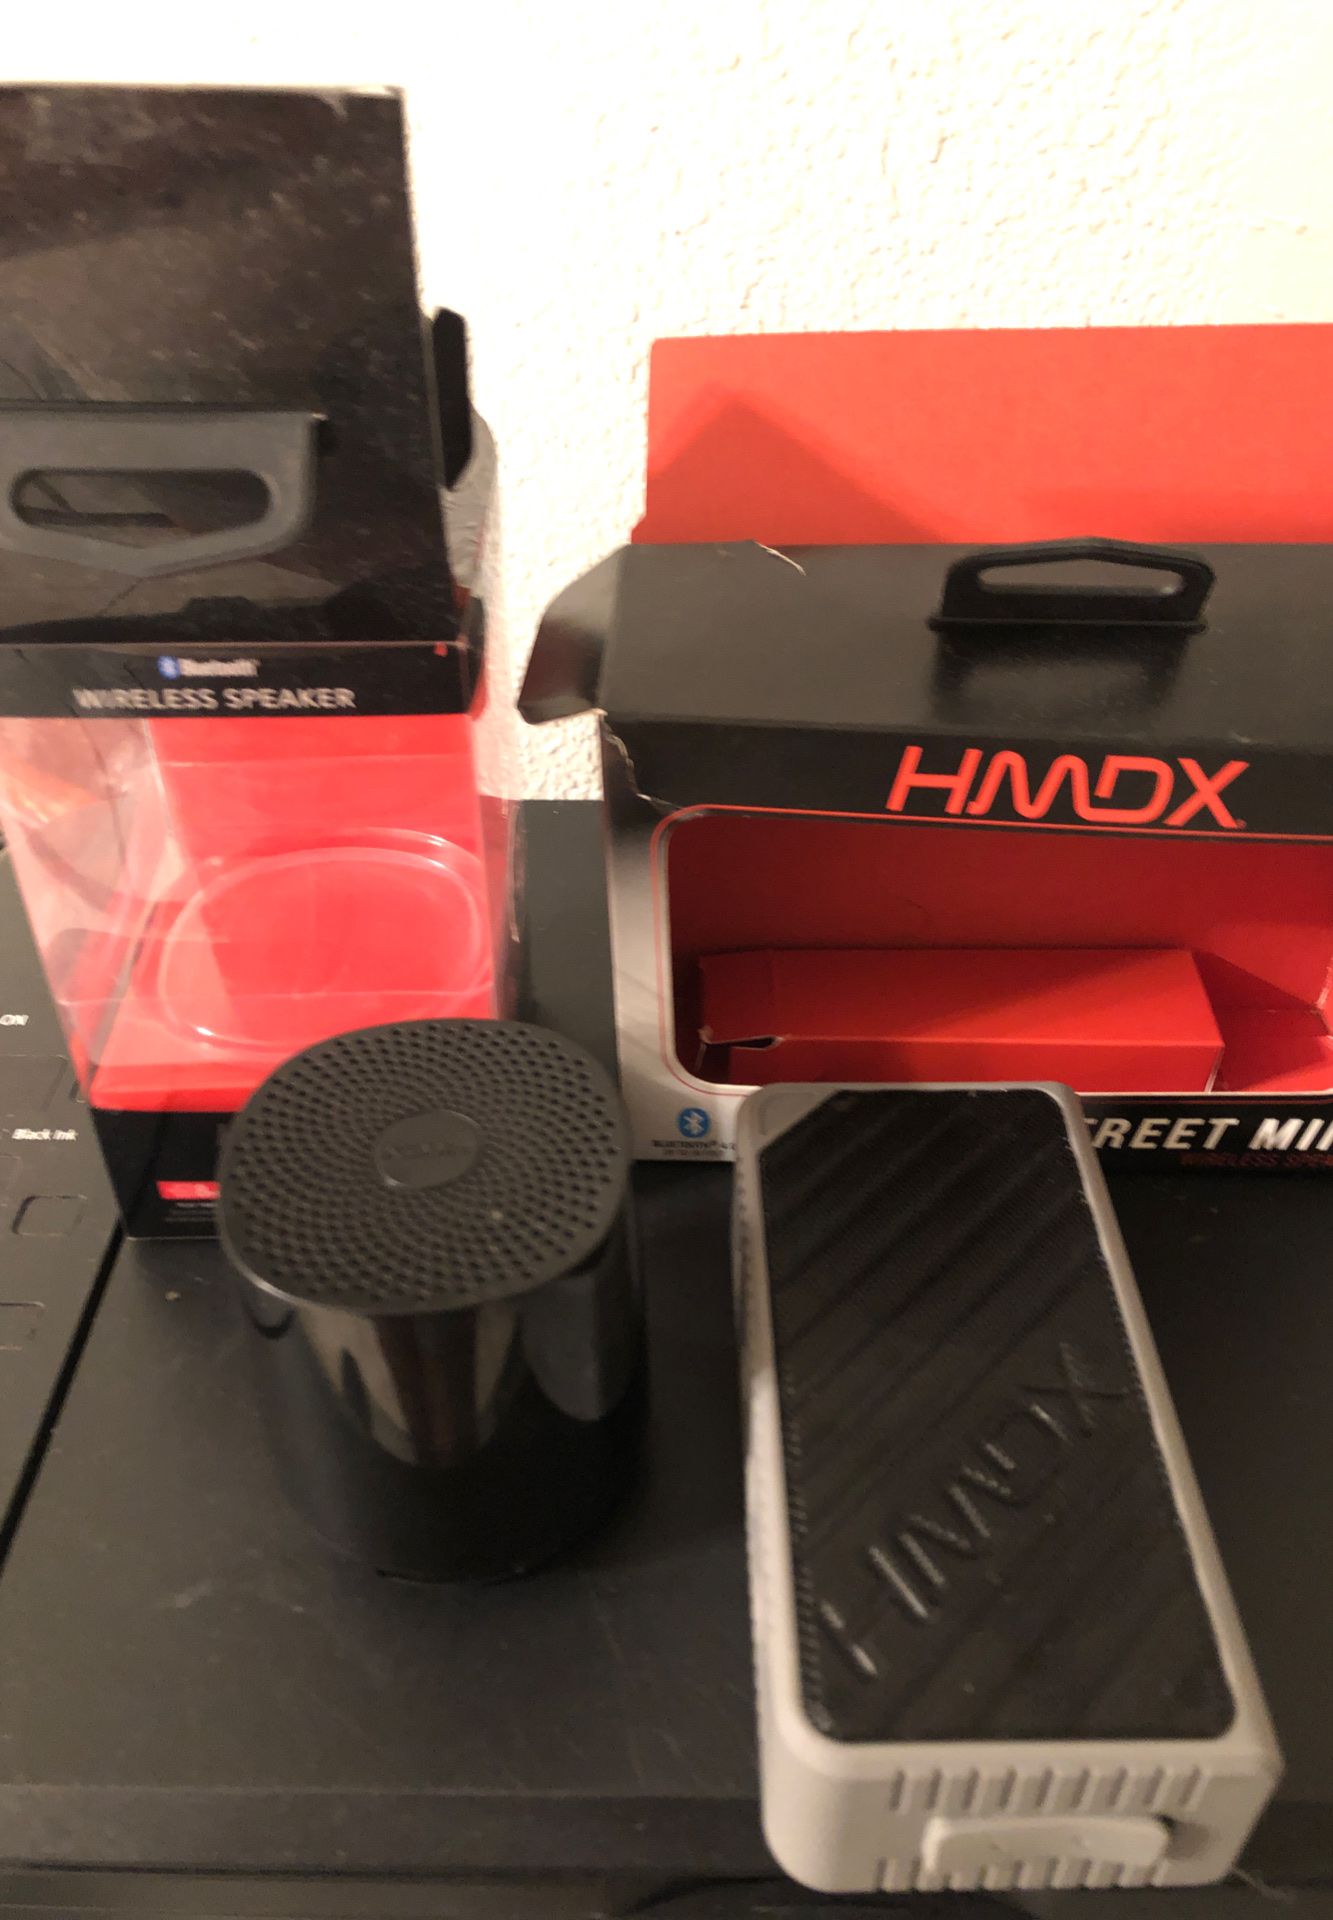 Hmdx wireless speakers 15 each or take both for 27.00